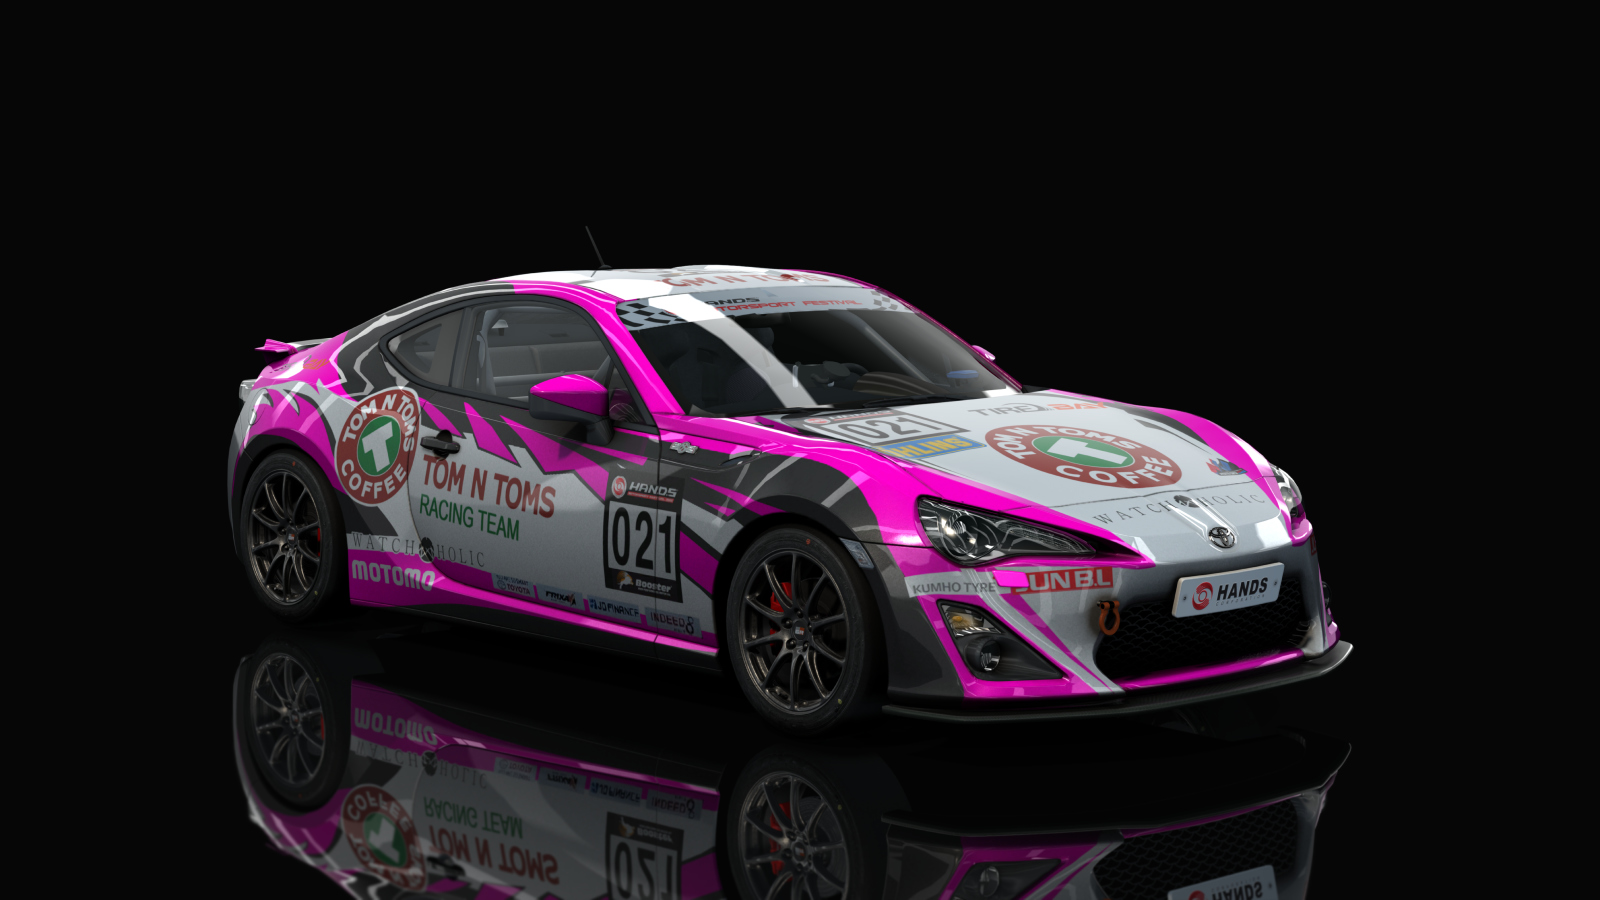 Toyota GT86 Cup, skin 021_TOMnTOMS